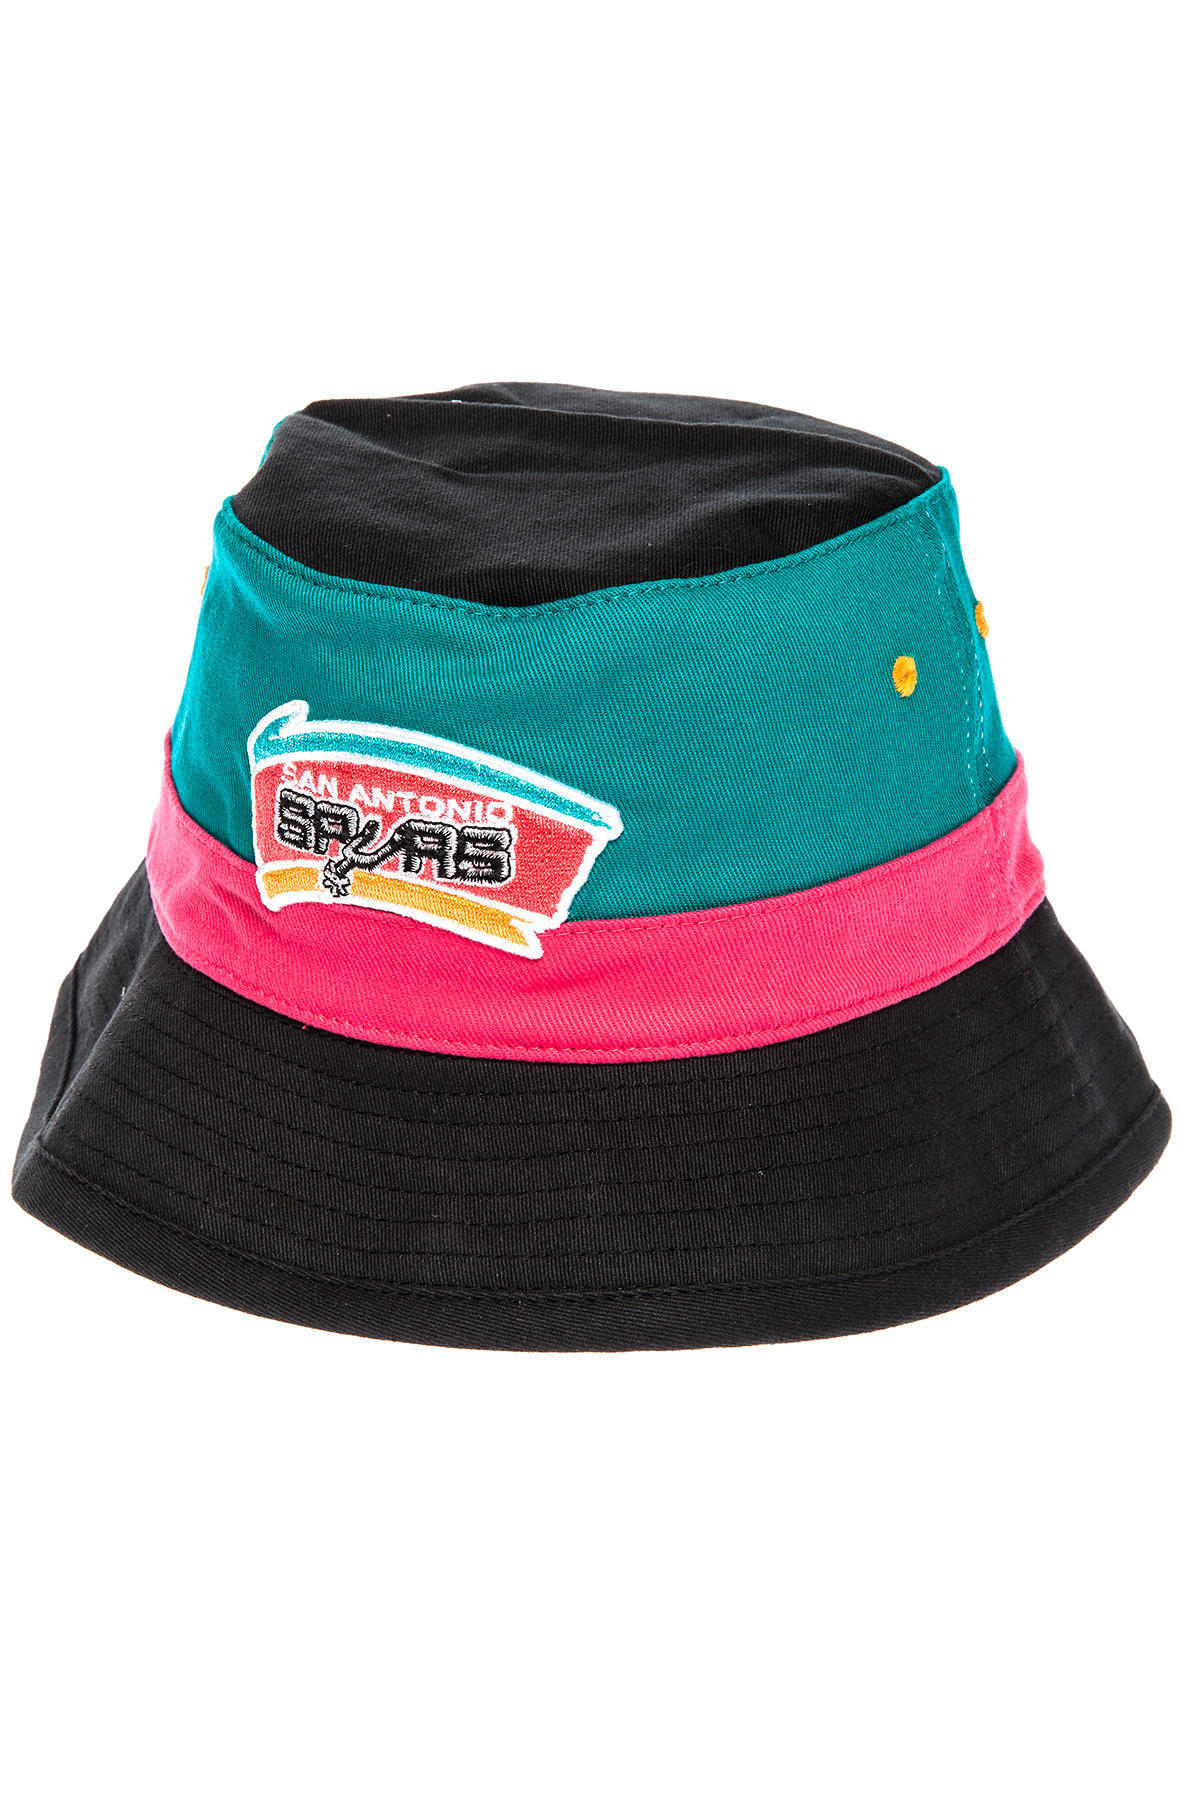 Mitchell & Ness The San Antonio Spurs Color Block Bucket Hat in Blue ...